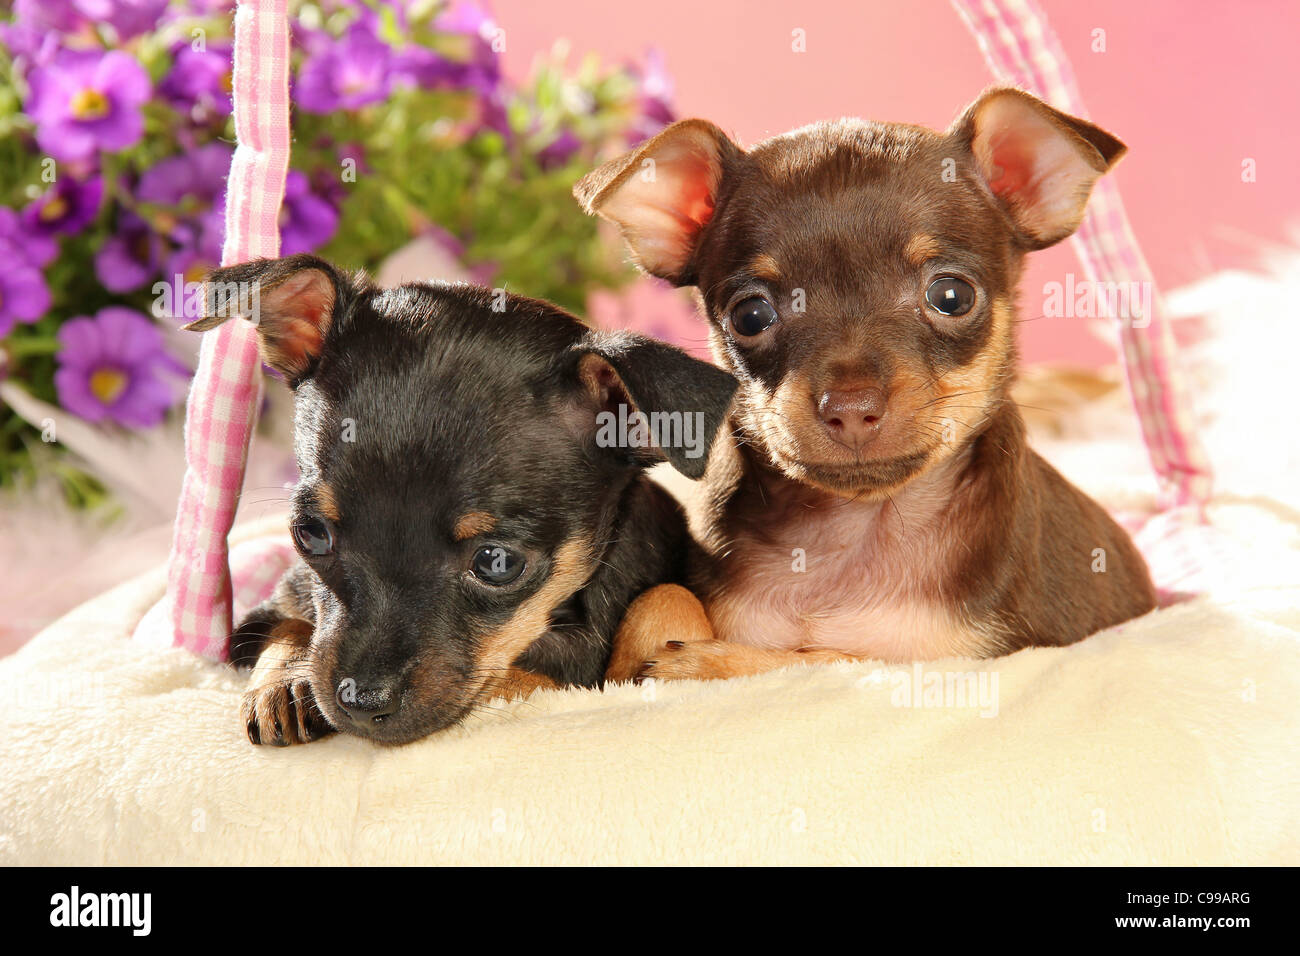 Russian Toy Terrier dog two puppies lying Stock Photo